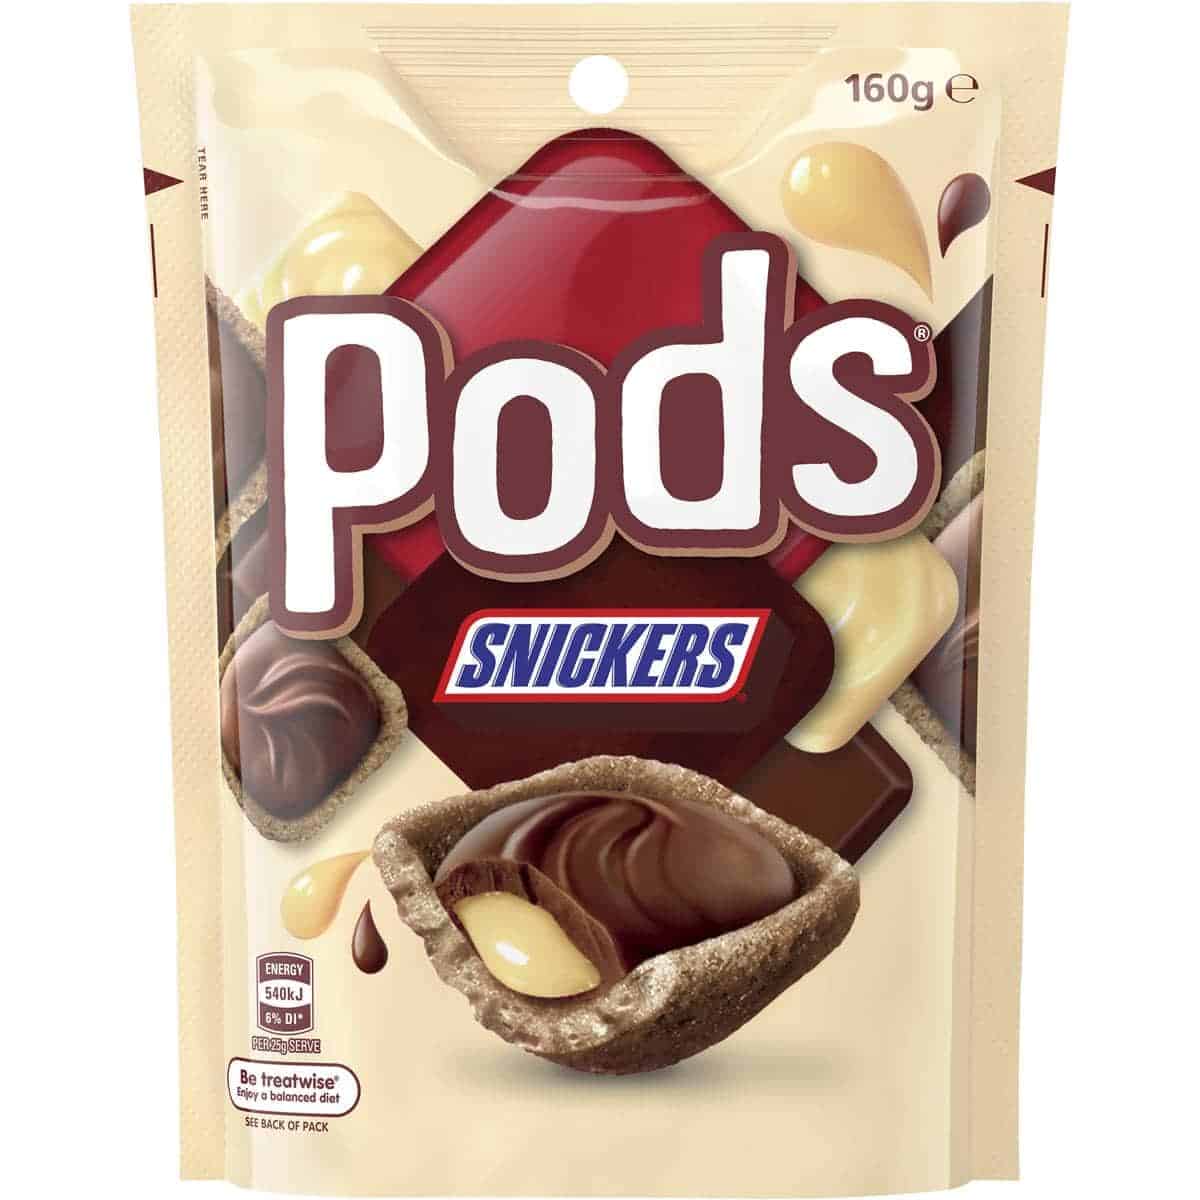 Pods Snickers